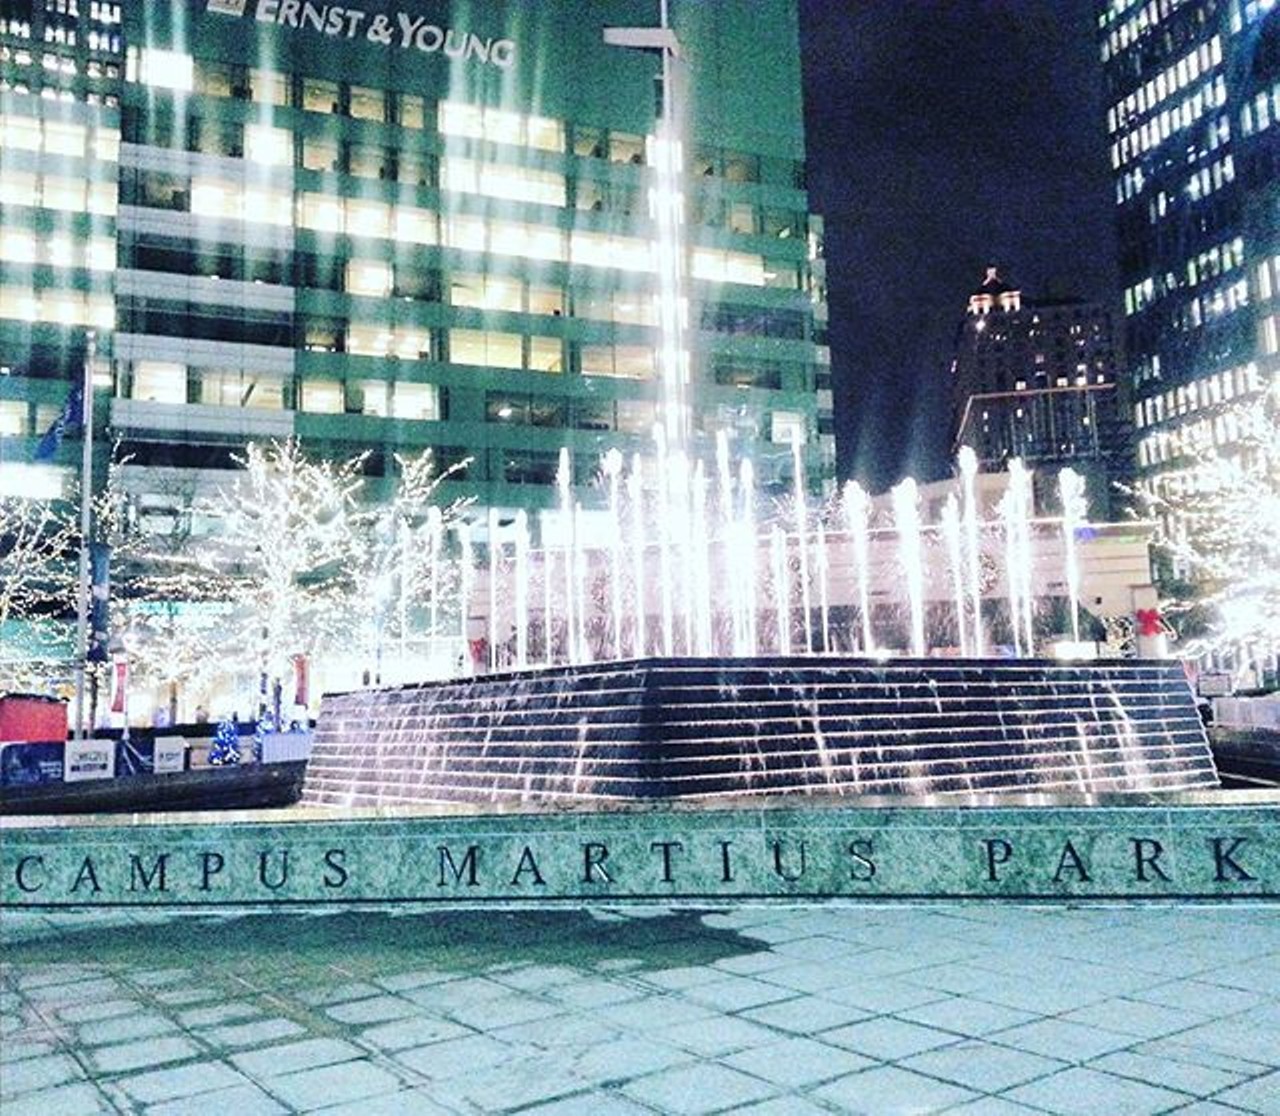 Campus Martius Park
During the winter or summer, Campus Martius Park is a great place to snag a snog, if you don&#146;t mind being watched by kids, families, tourists, etc. With the ice rink and Christmas tree in the winter or a nice green lawn in the summer, the city park can accommodate your necking needs all year round; 800 Woodward Ave.: campusmartiuspark.org. (Photo courtesy of instagram user heathercadilac)